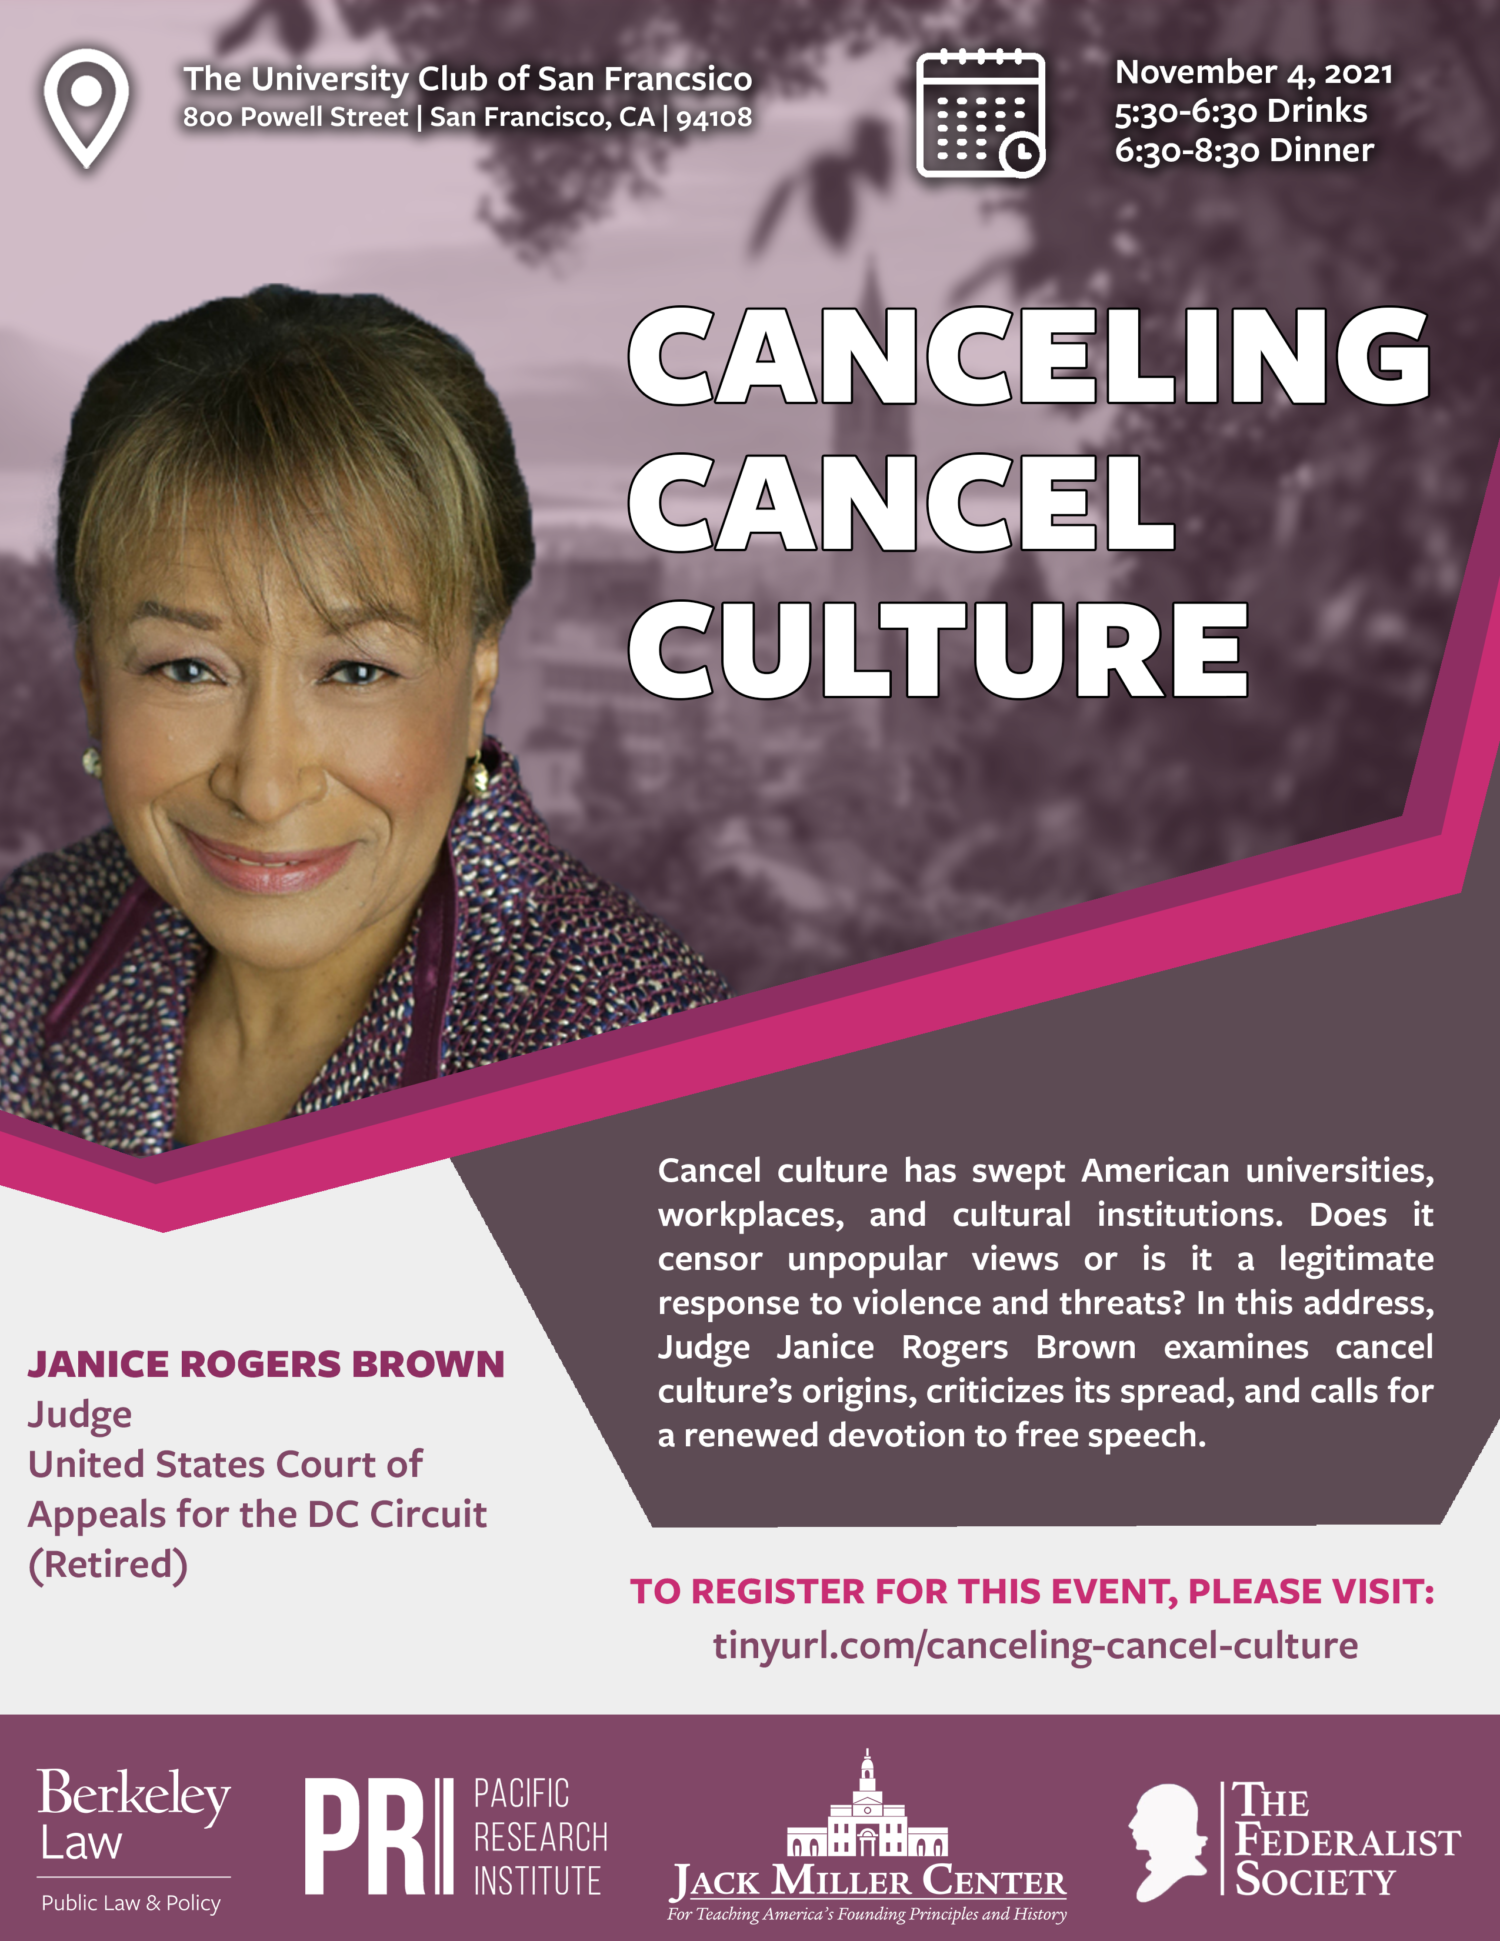 Canceling Cancel Culture Event Flyer